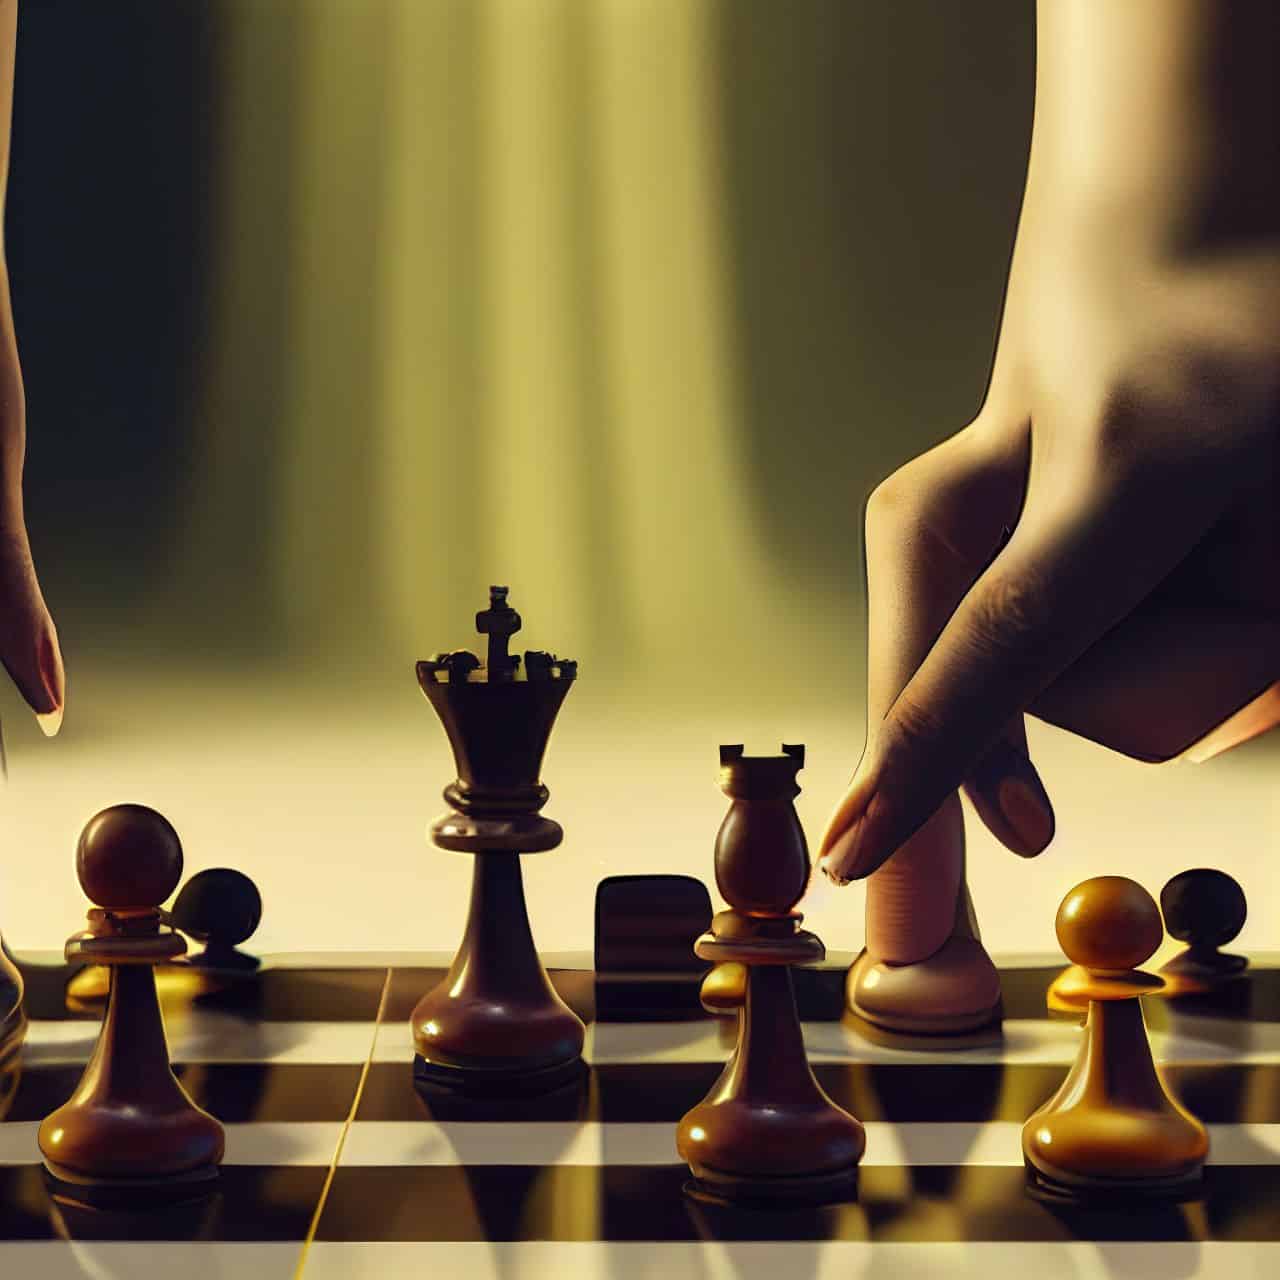 How to Win Chess in 4 Moves and Less? - EnthuZiastic